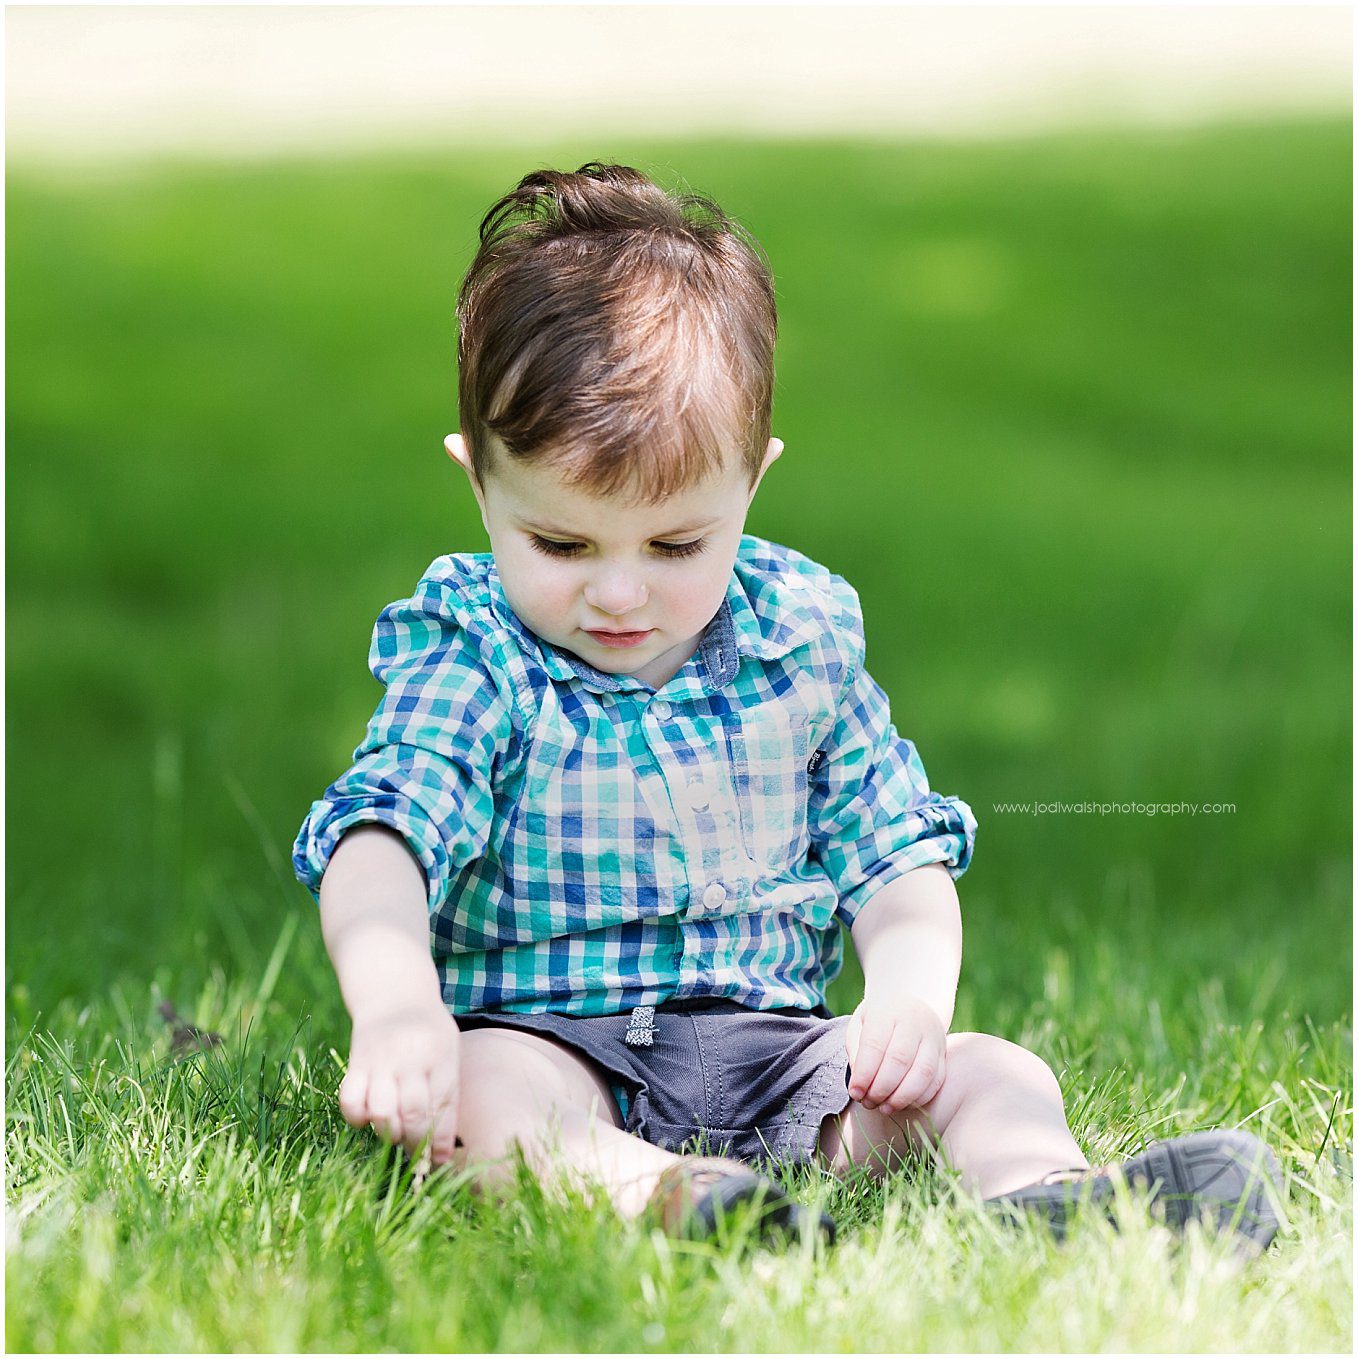 image of a little boy sitting in the grass. He's looking down at the blades of grass. He's wearing a blue plaid shirt and navy shorts.